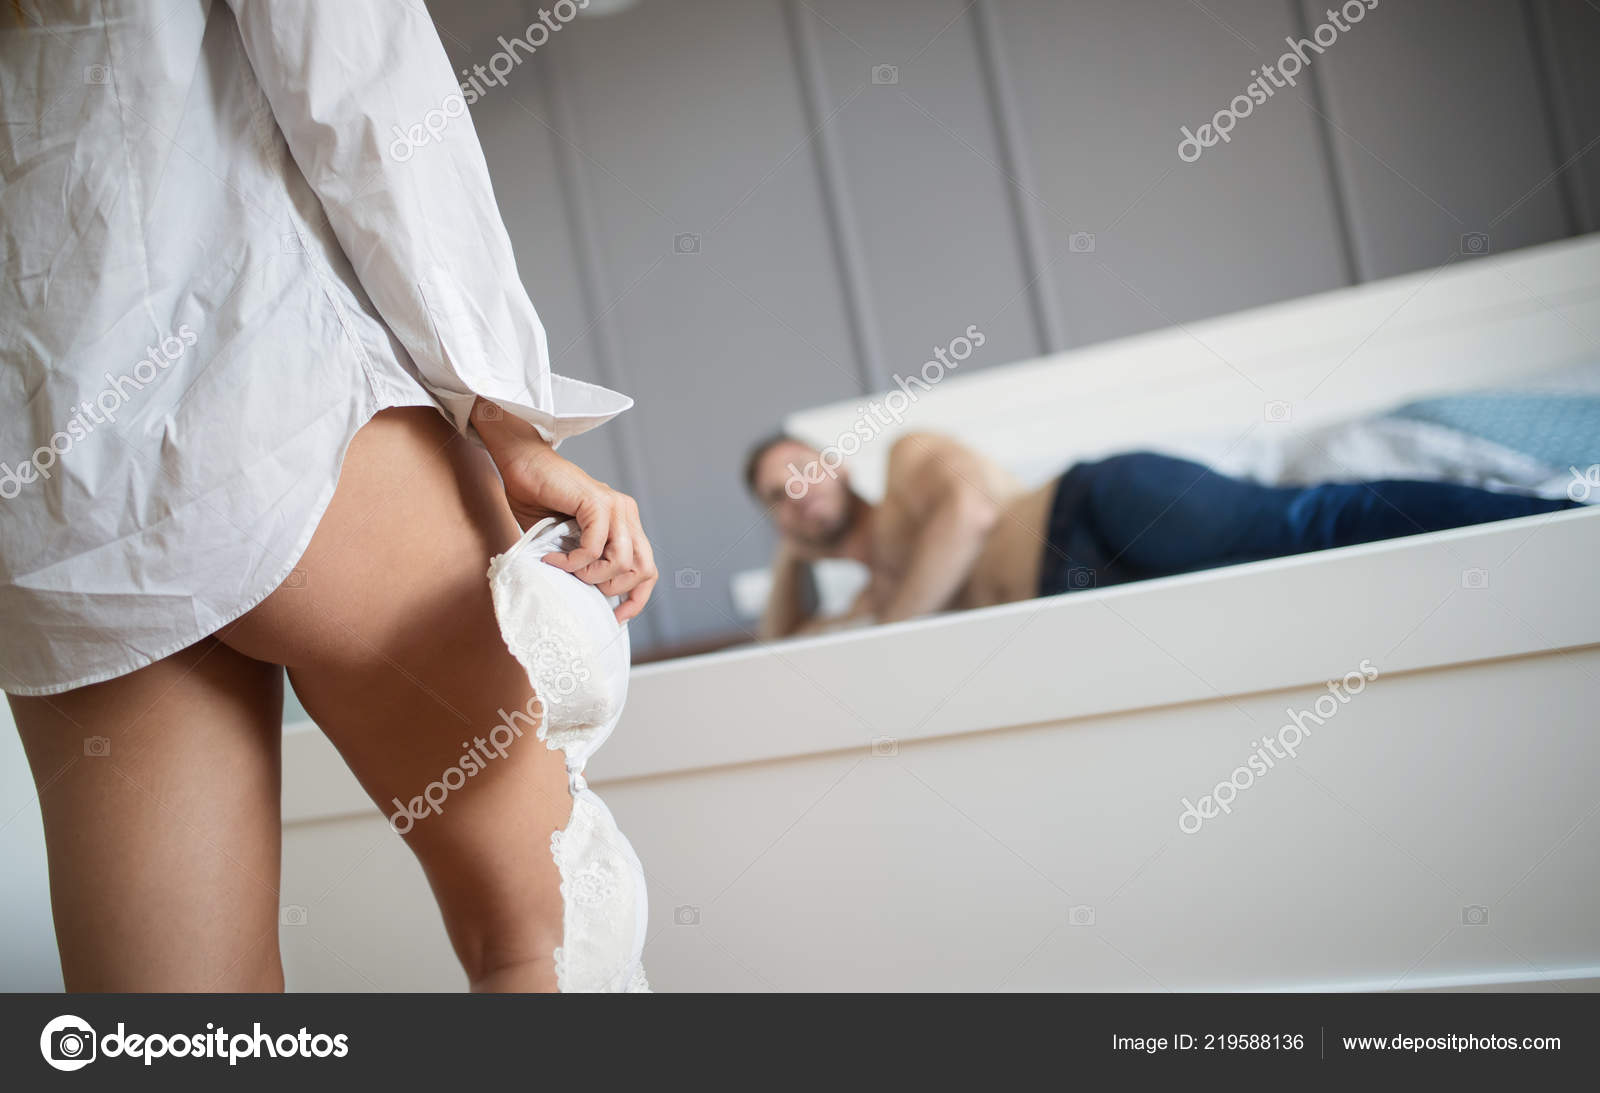 Sexy Woman Getting Ready Sex Bedroom Her Lover Stock Photo by ©nd3000 219588136